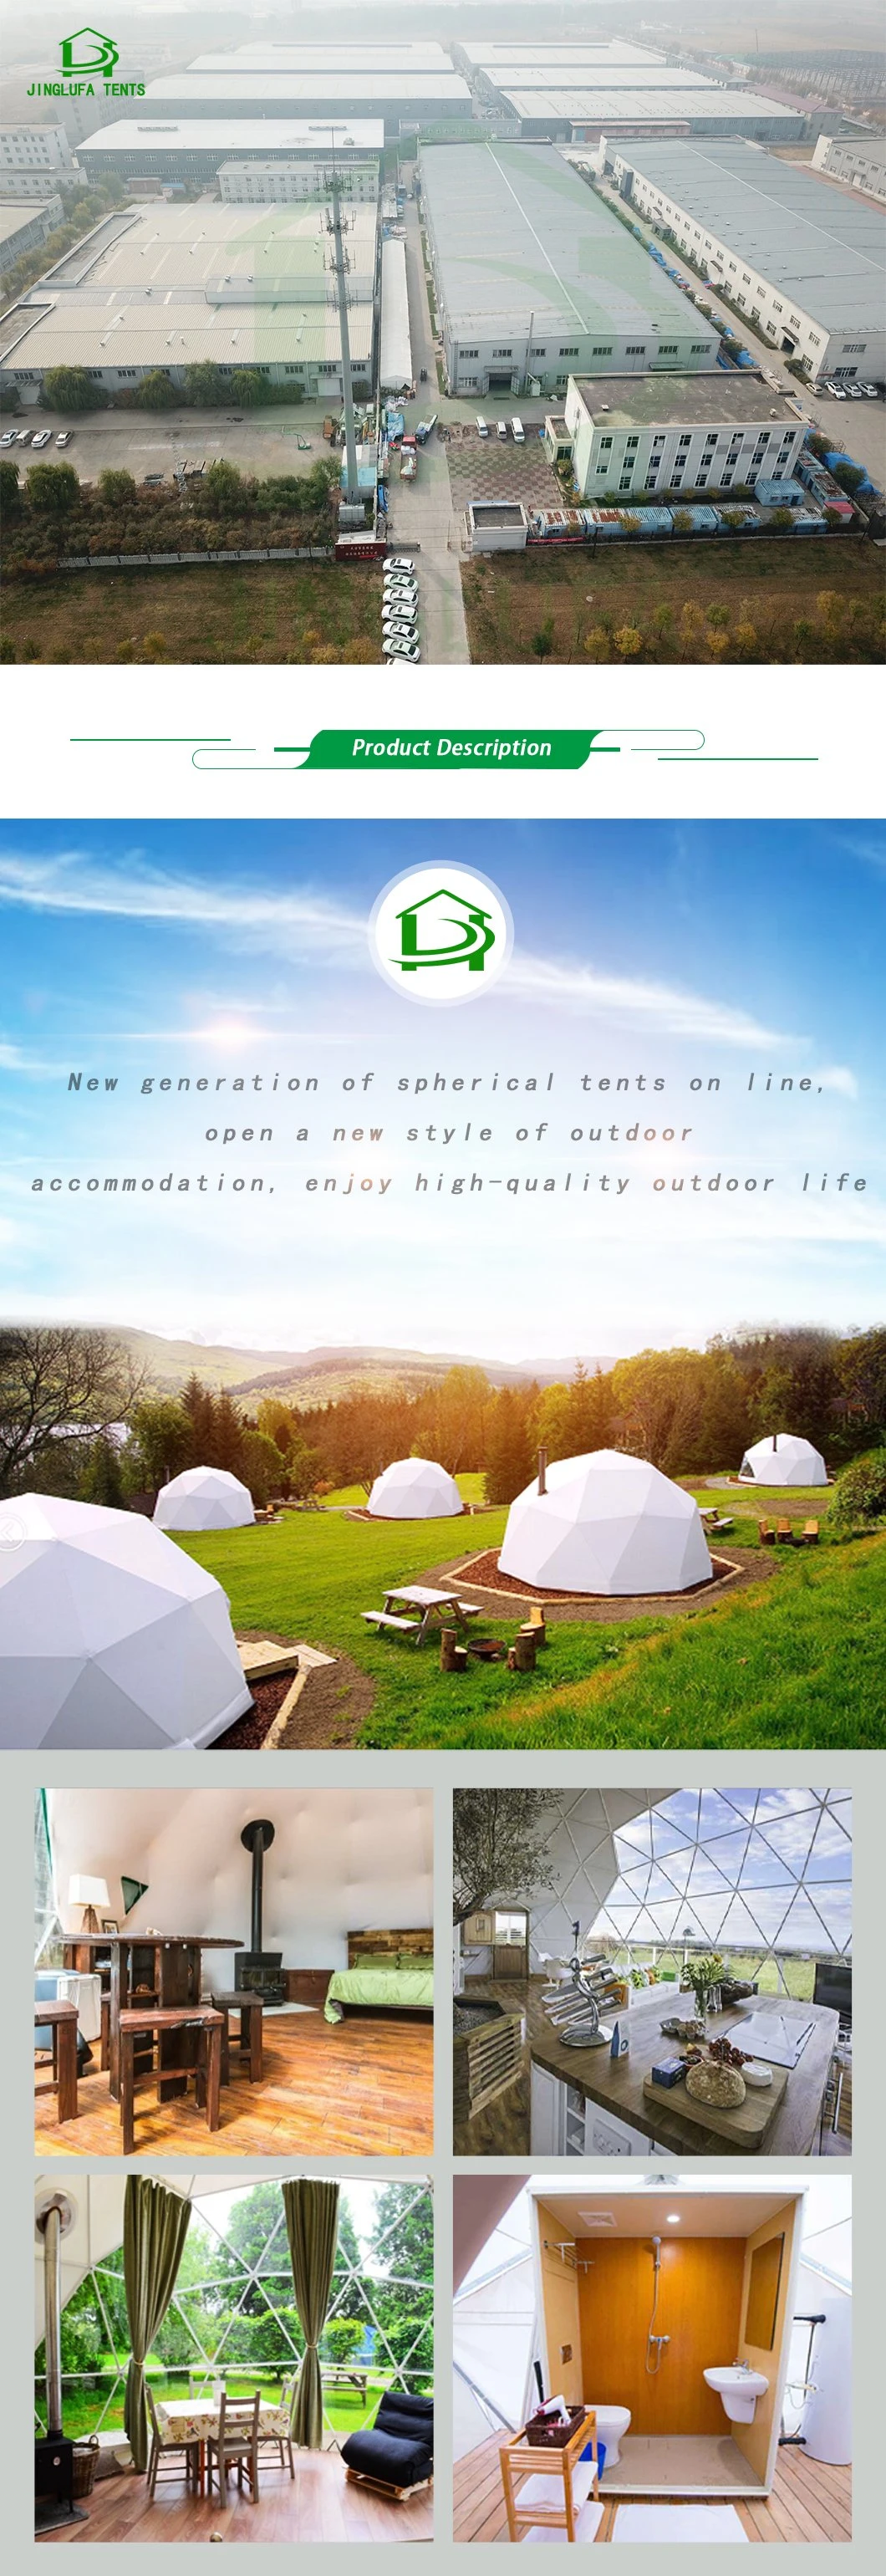 Waterproof PVC Fabric Dome Tent Luxury Geodesic Dome Tent Hotel